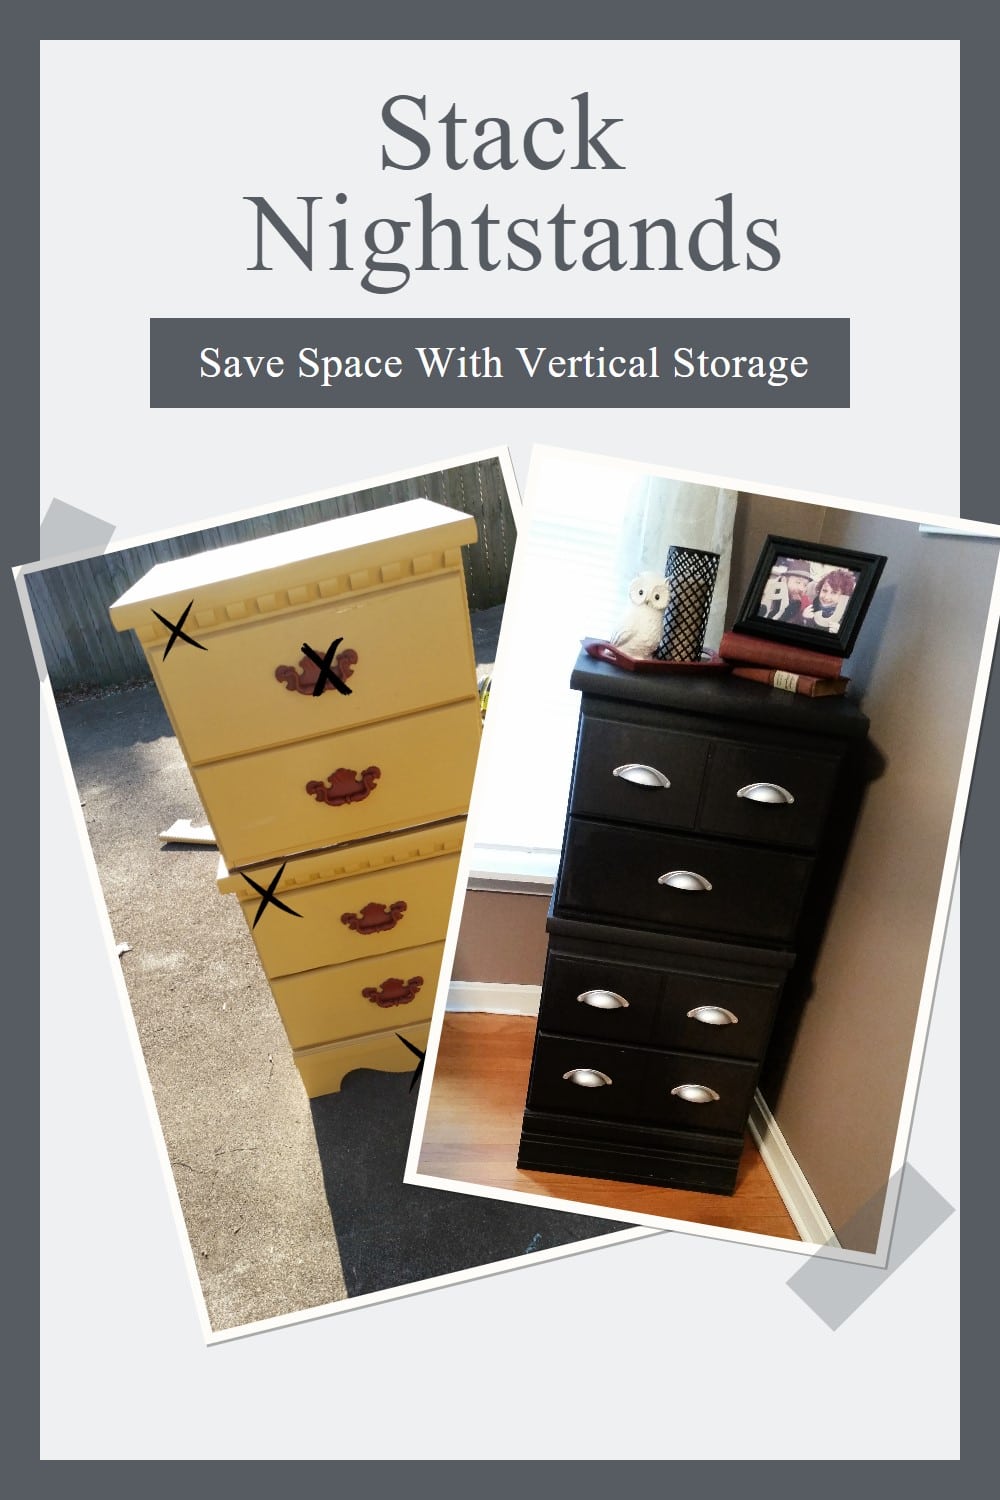 This small chest made from repurposed nightstands gives a good amount of storage with a small footprint. Vertical storage is a great option in small spaces. #MyRepurposedLife #repurposed #nightstands #stacked #furniture #vertical #storage via @repurposedlife